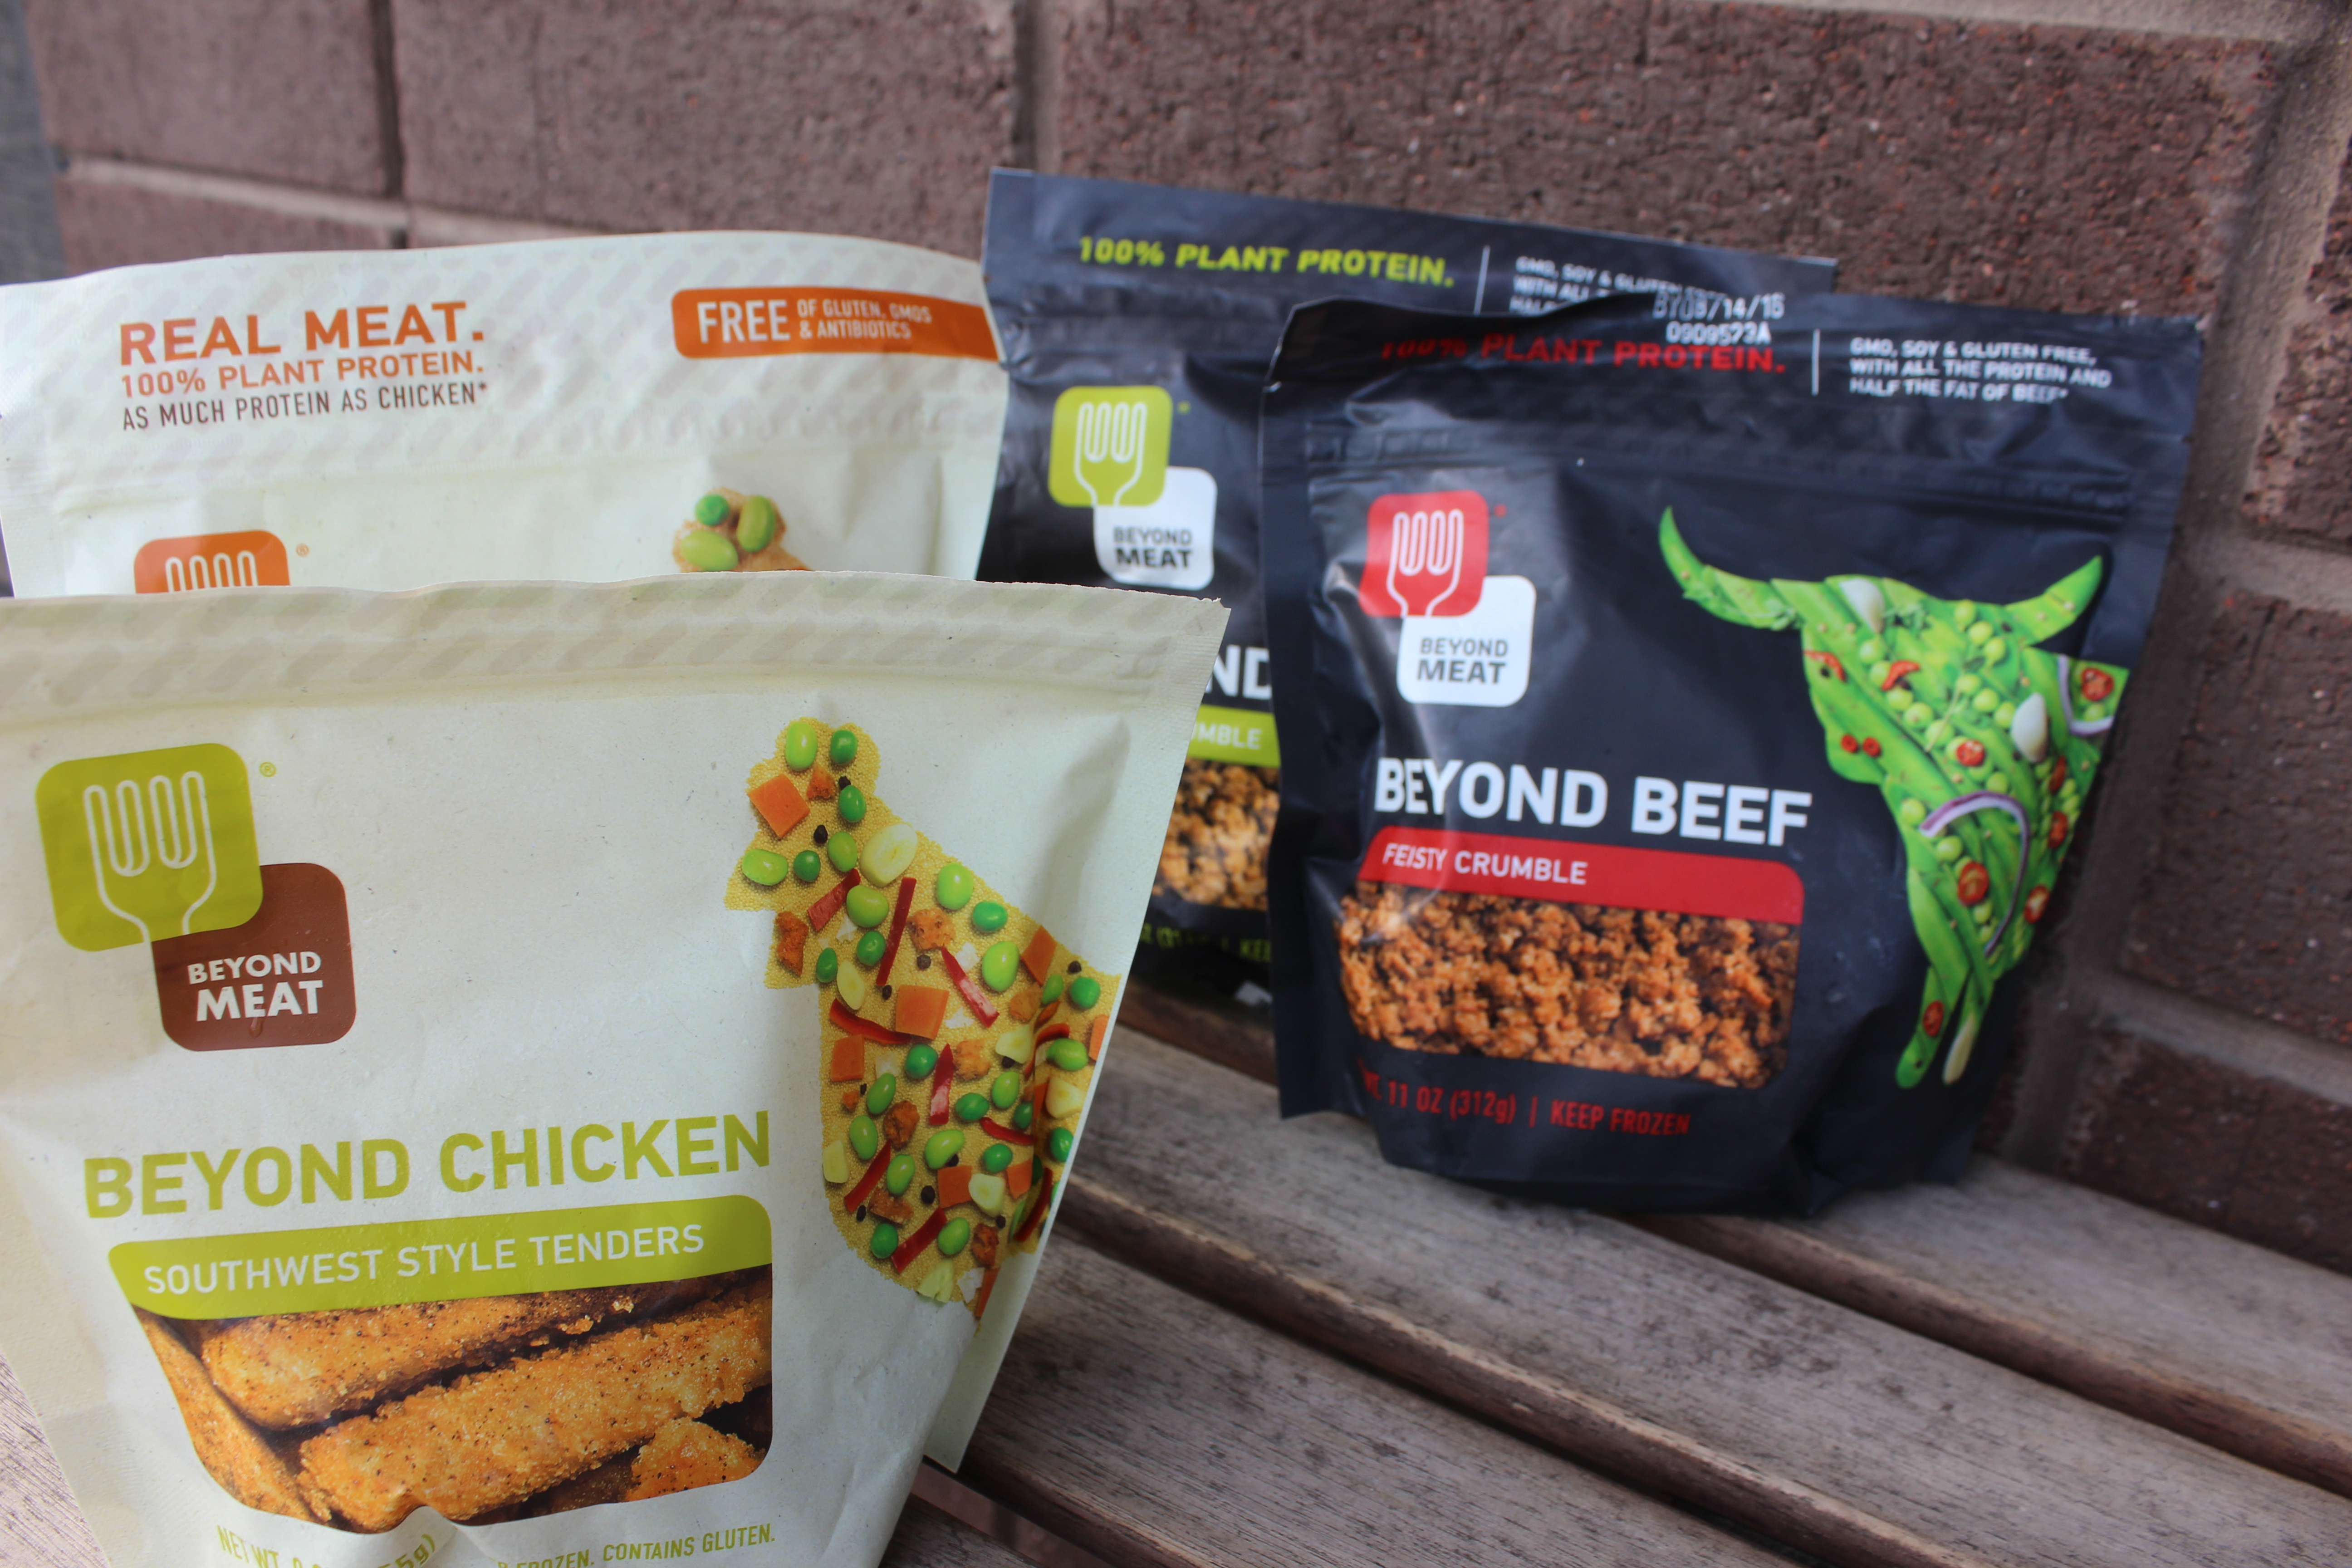 Beyond Meat: The Challenge